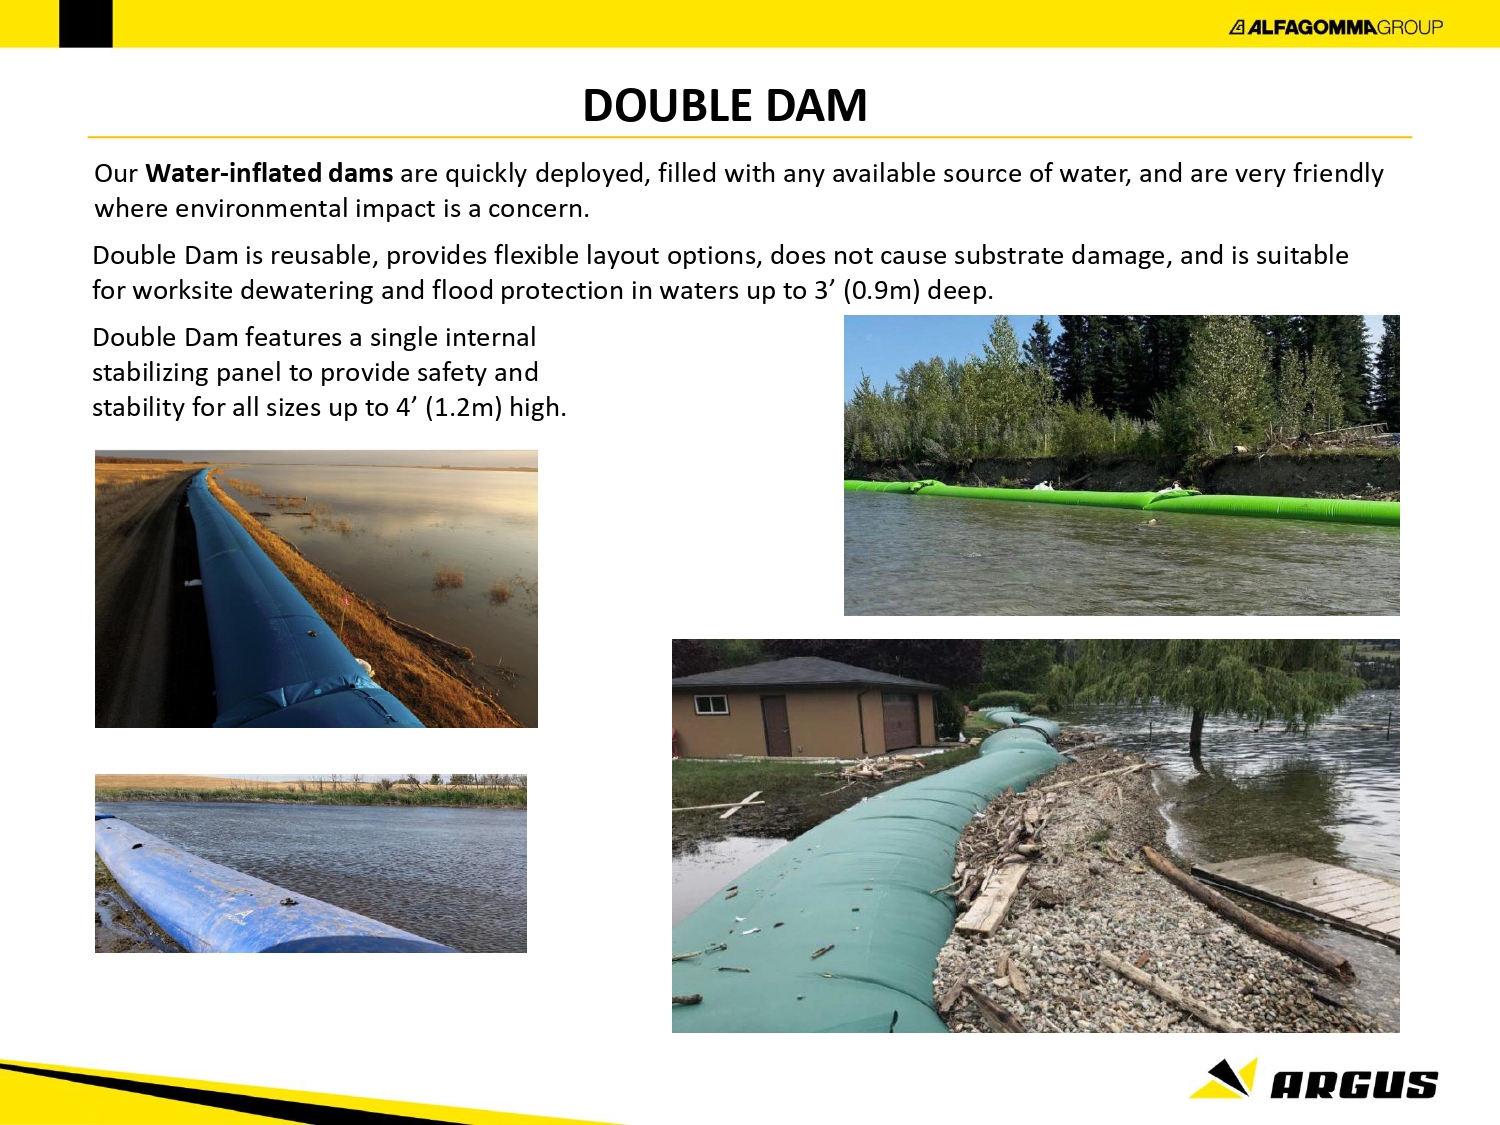 Alfagomma Water Barrier - Double Dam - FLOOD PROTECTION